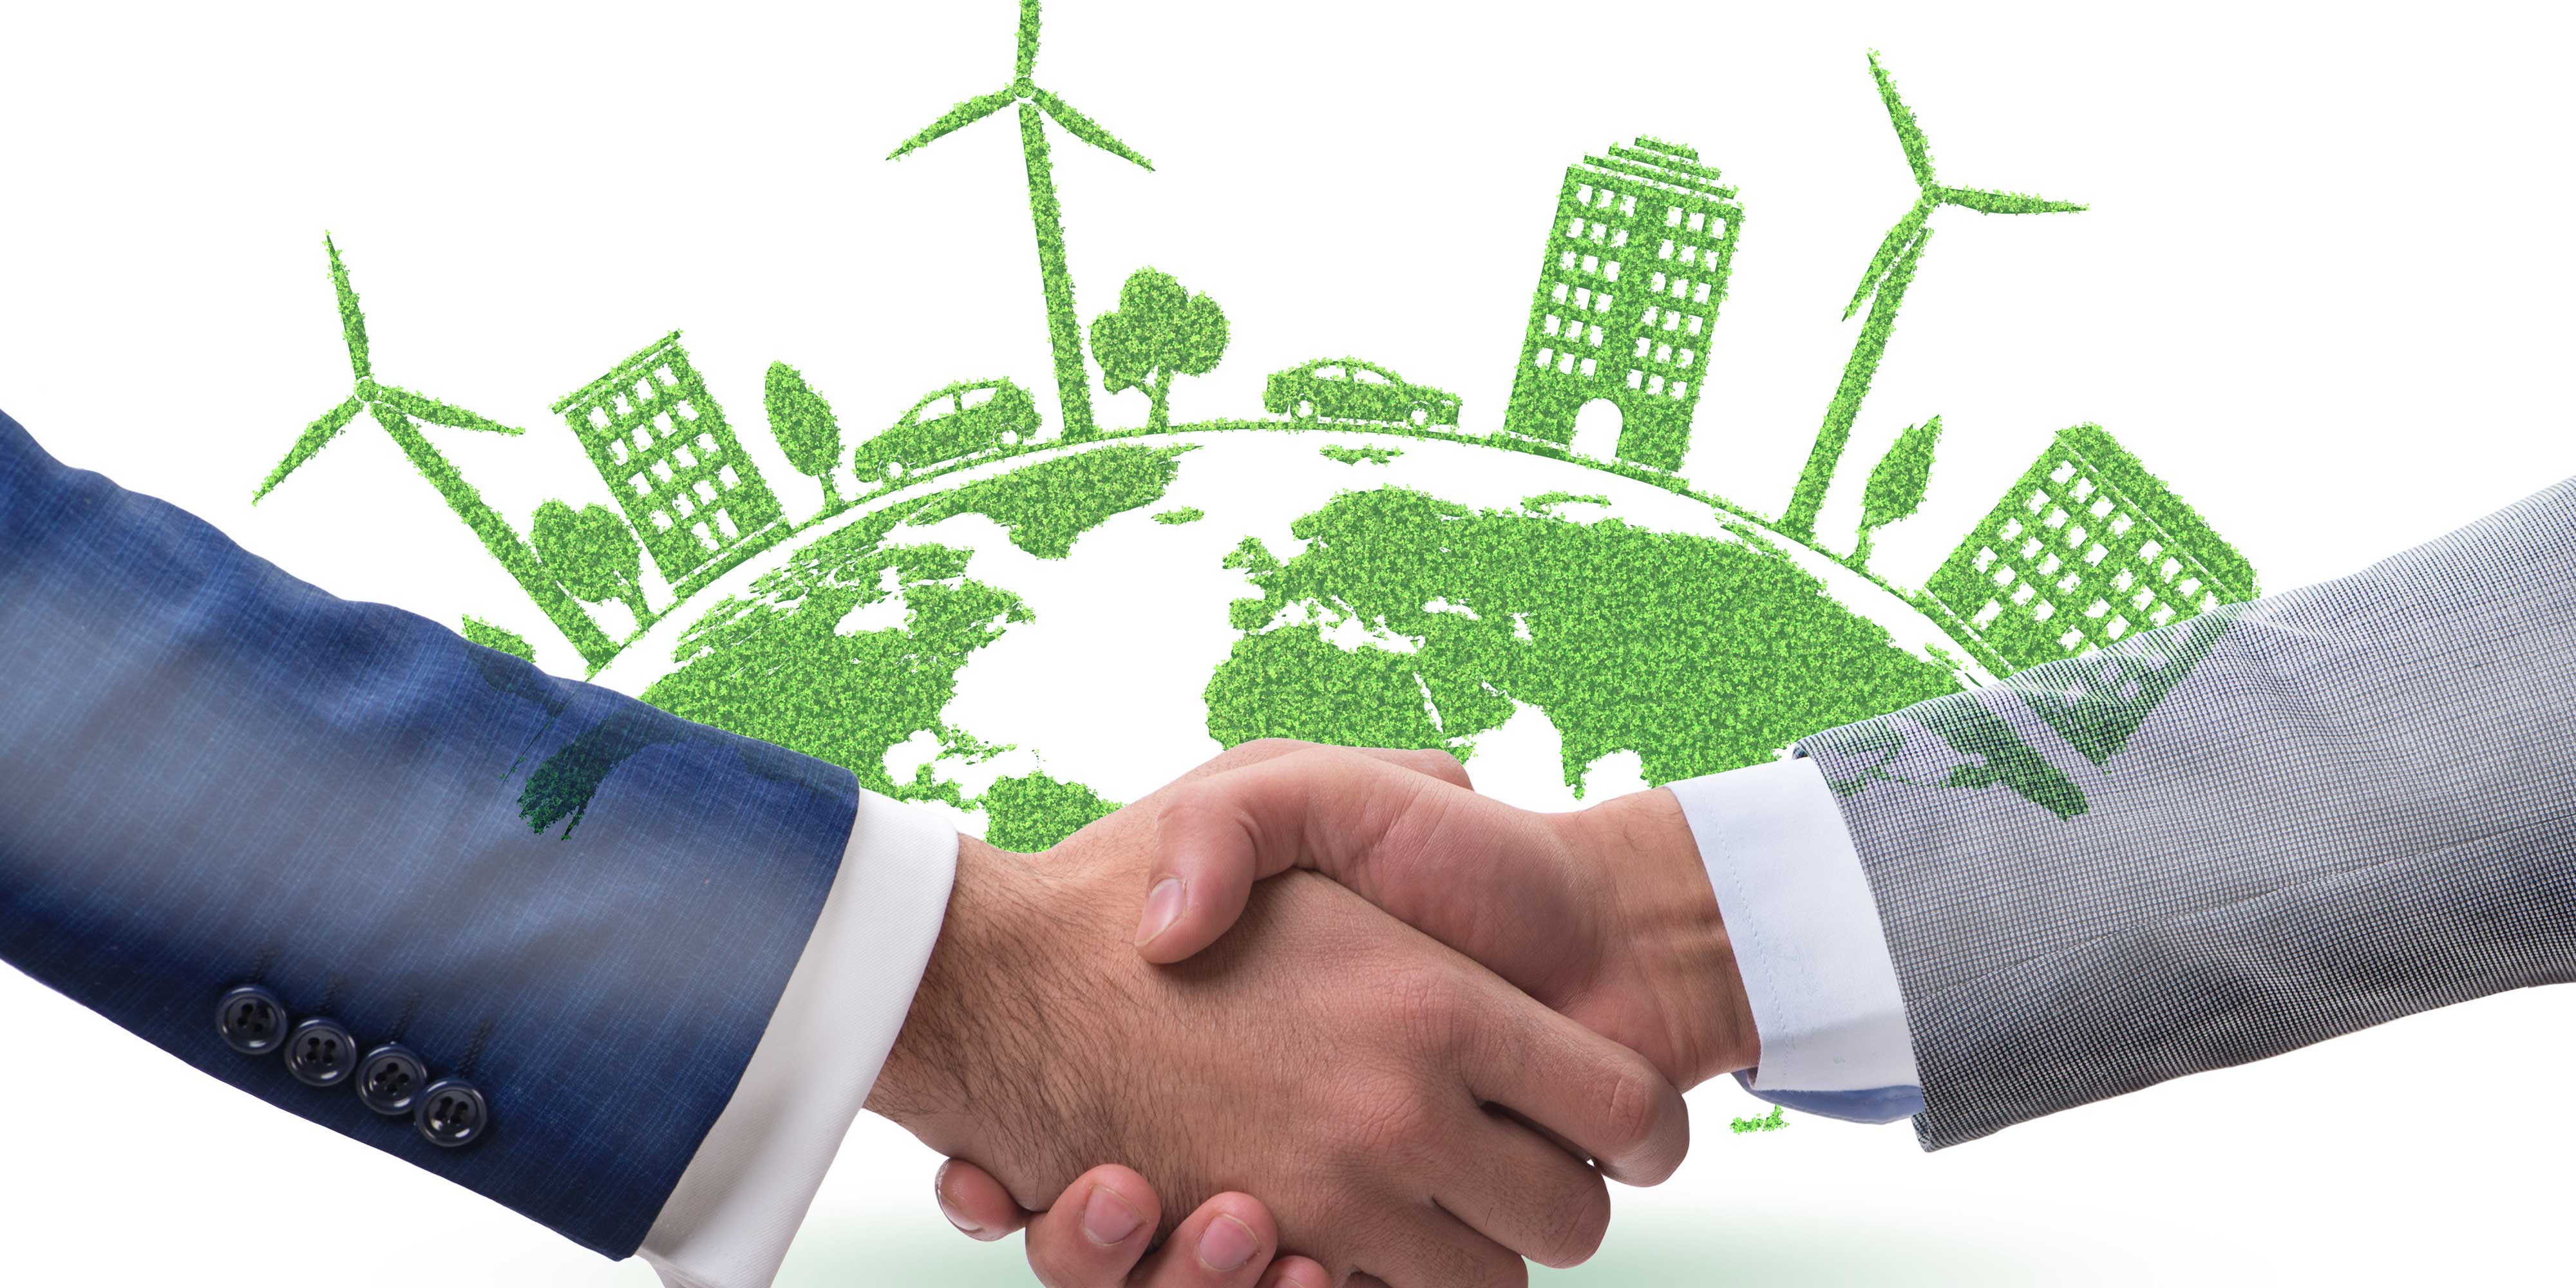 Energy Exemplar Joins the American Clean Power Association (ACP)